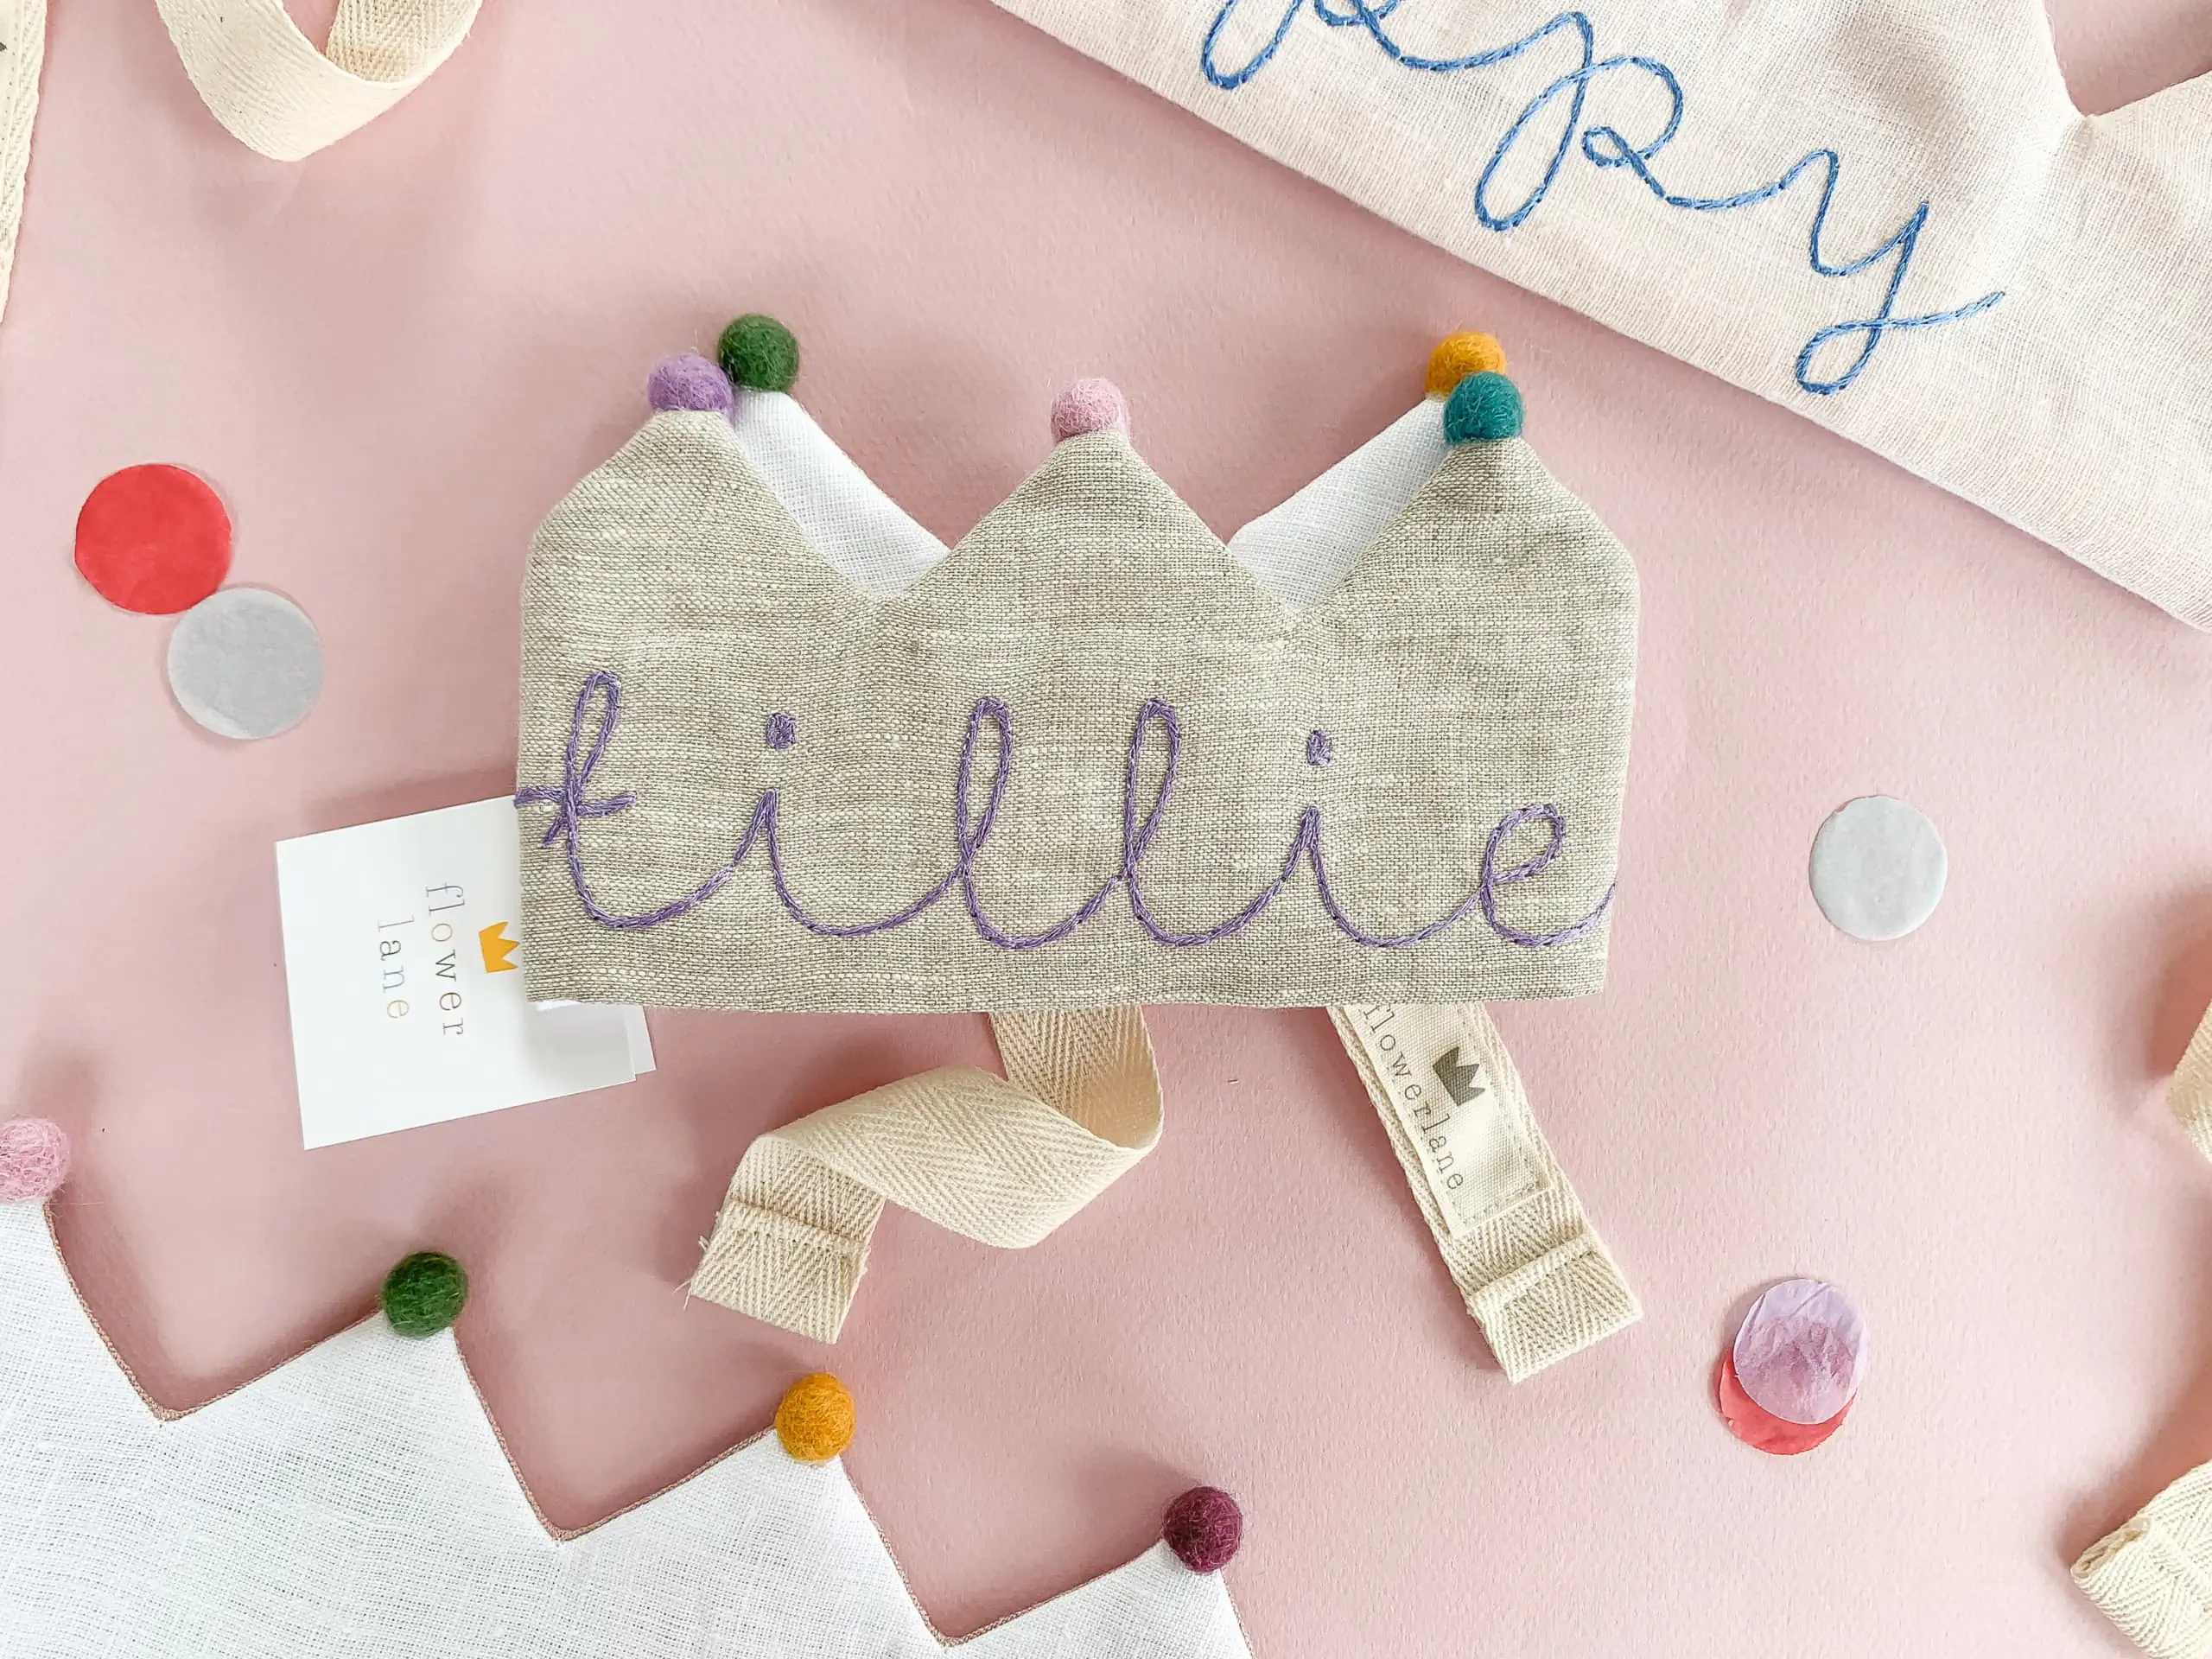 A grey linen kids birthday crown with rainbow pom poms and the name "tillie" embroidered on it. It's on a pink background. 